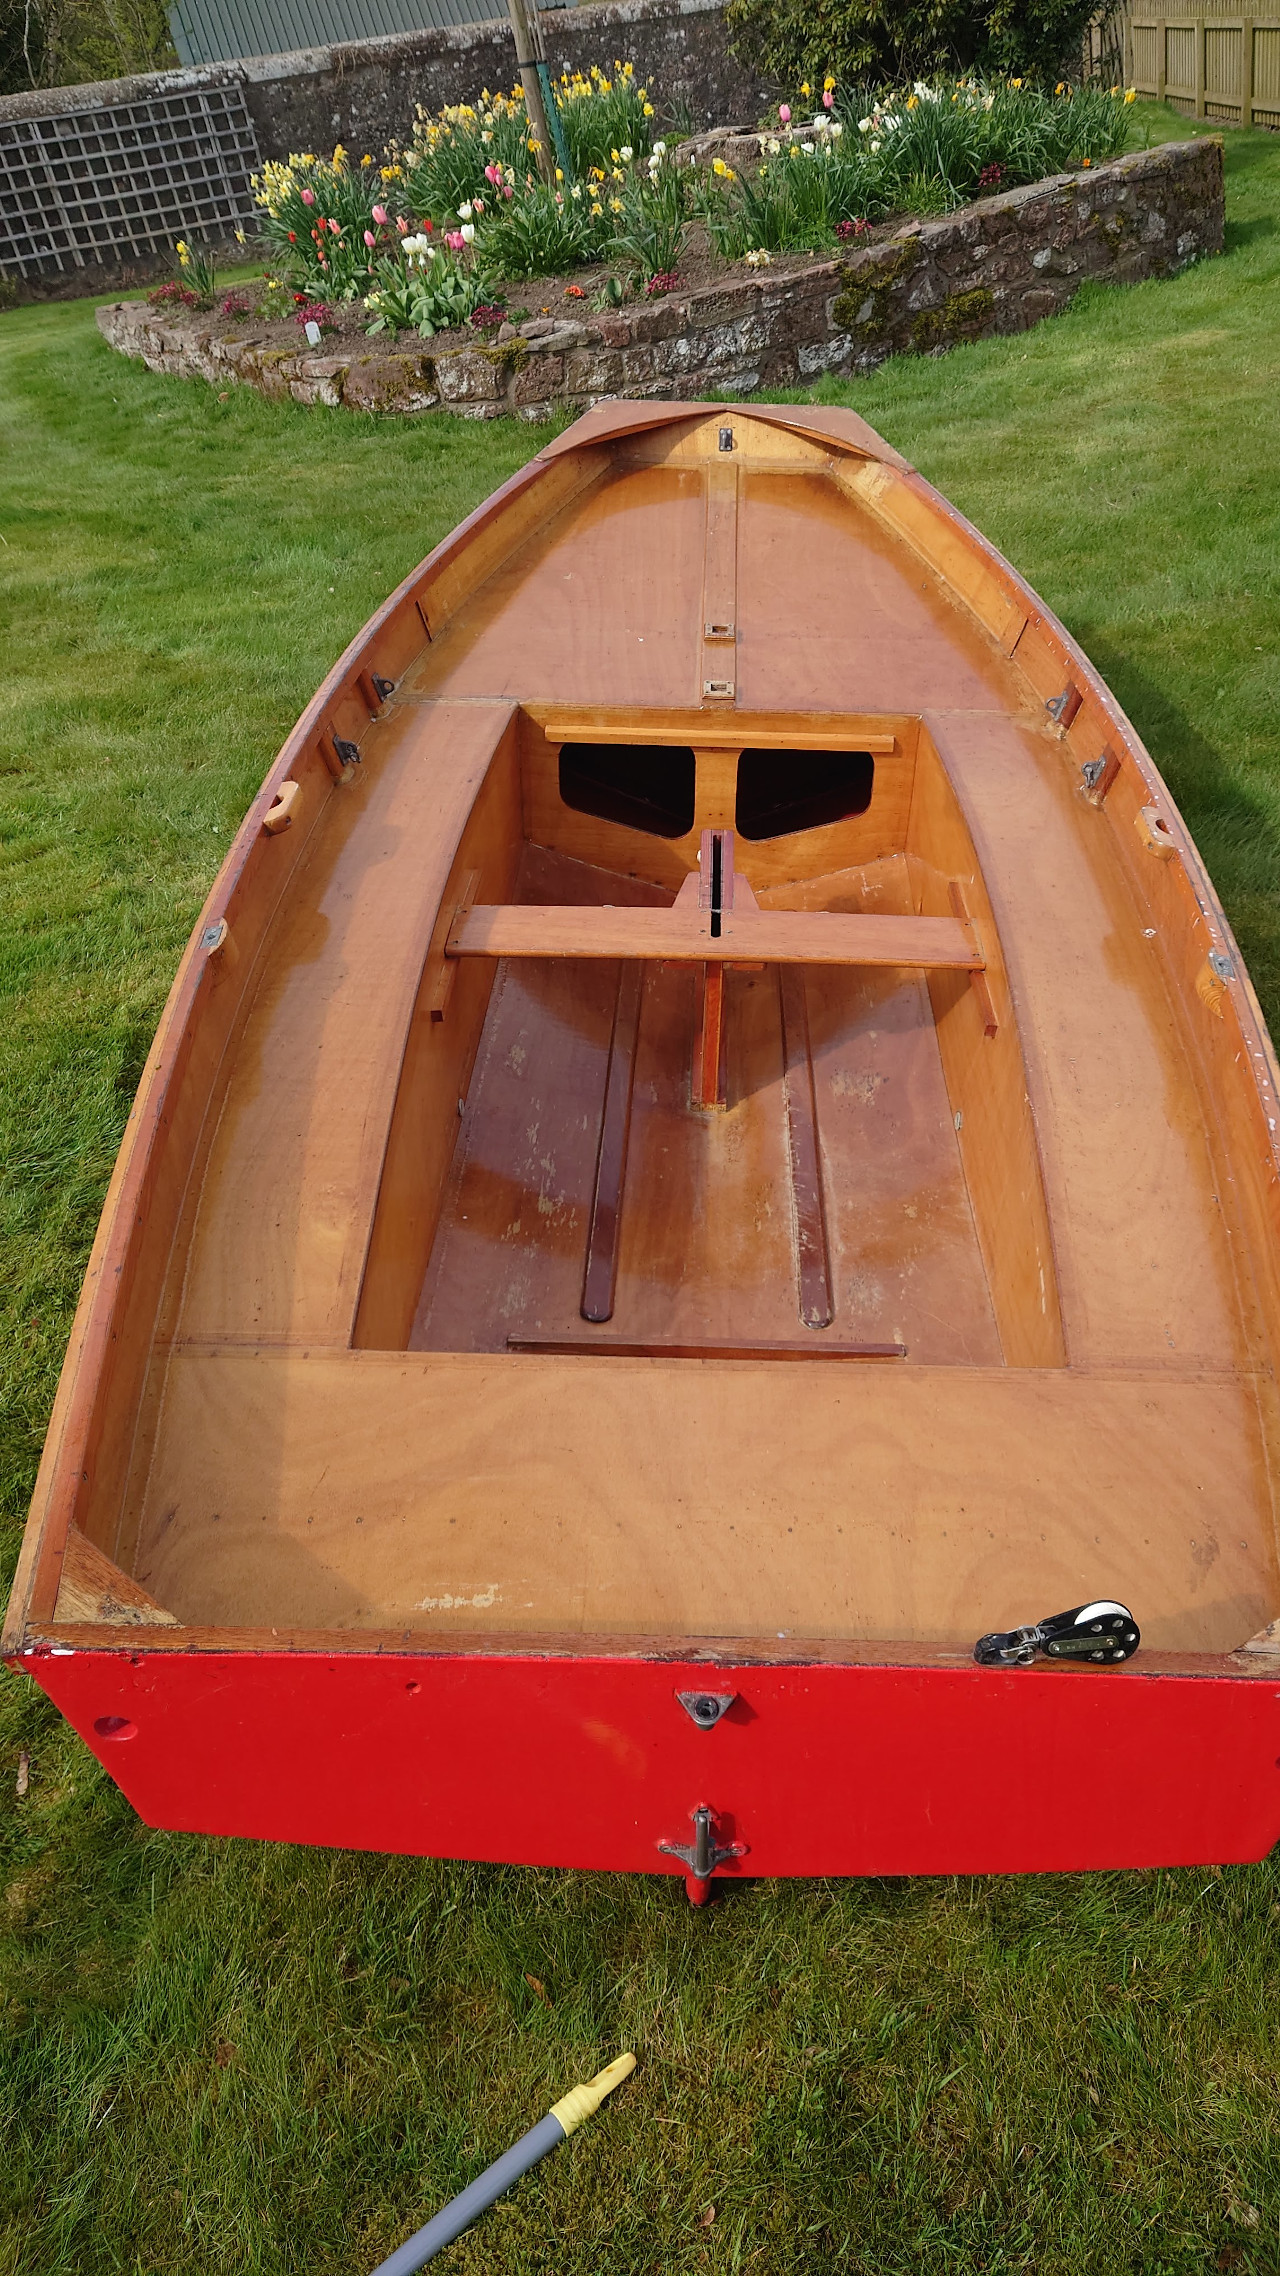 The hull of a wooden Mirror dinghy, the correct way up, on a grass lawn